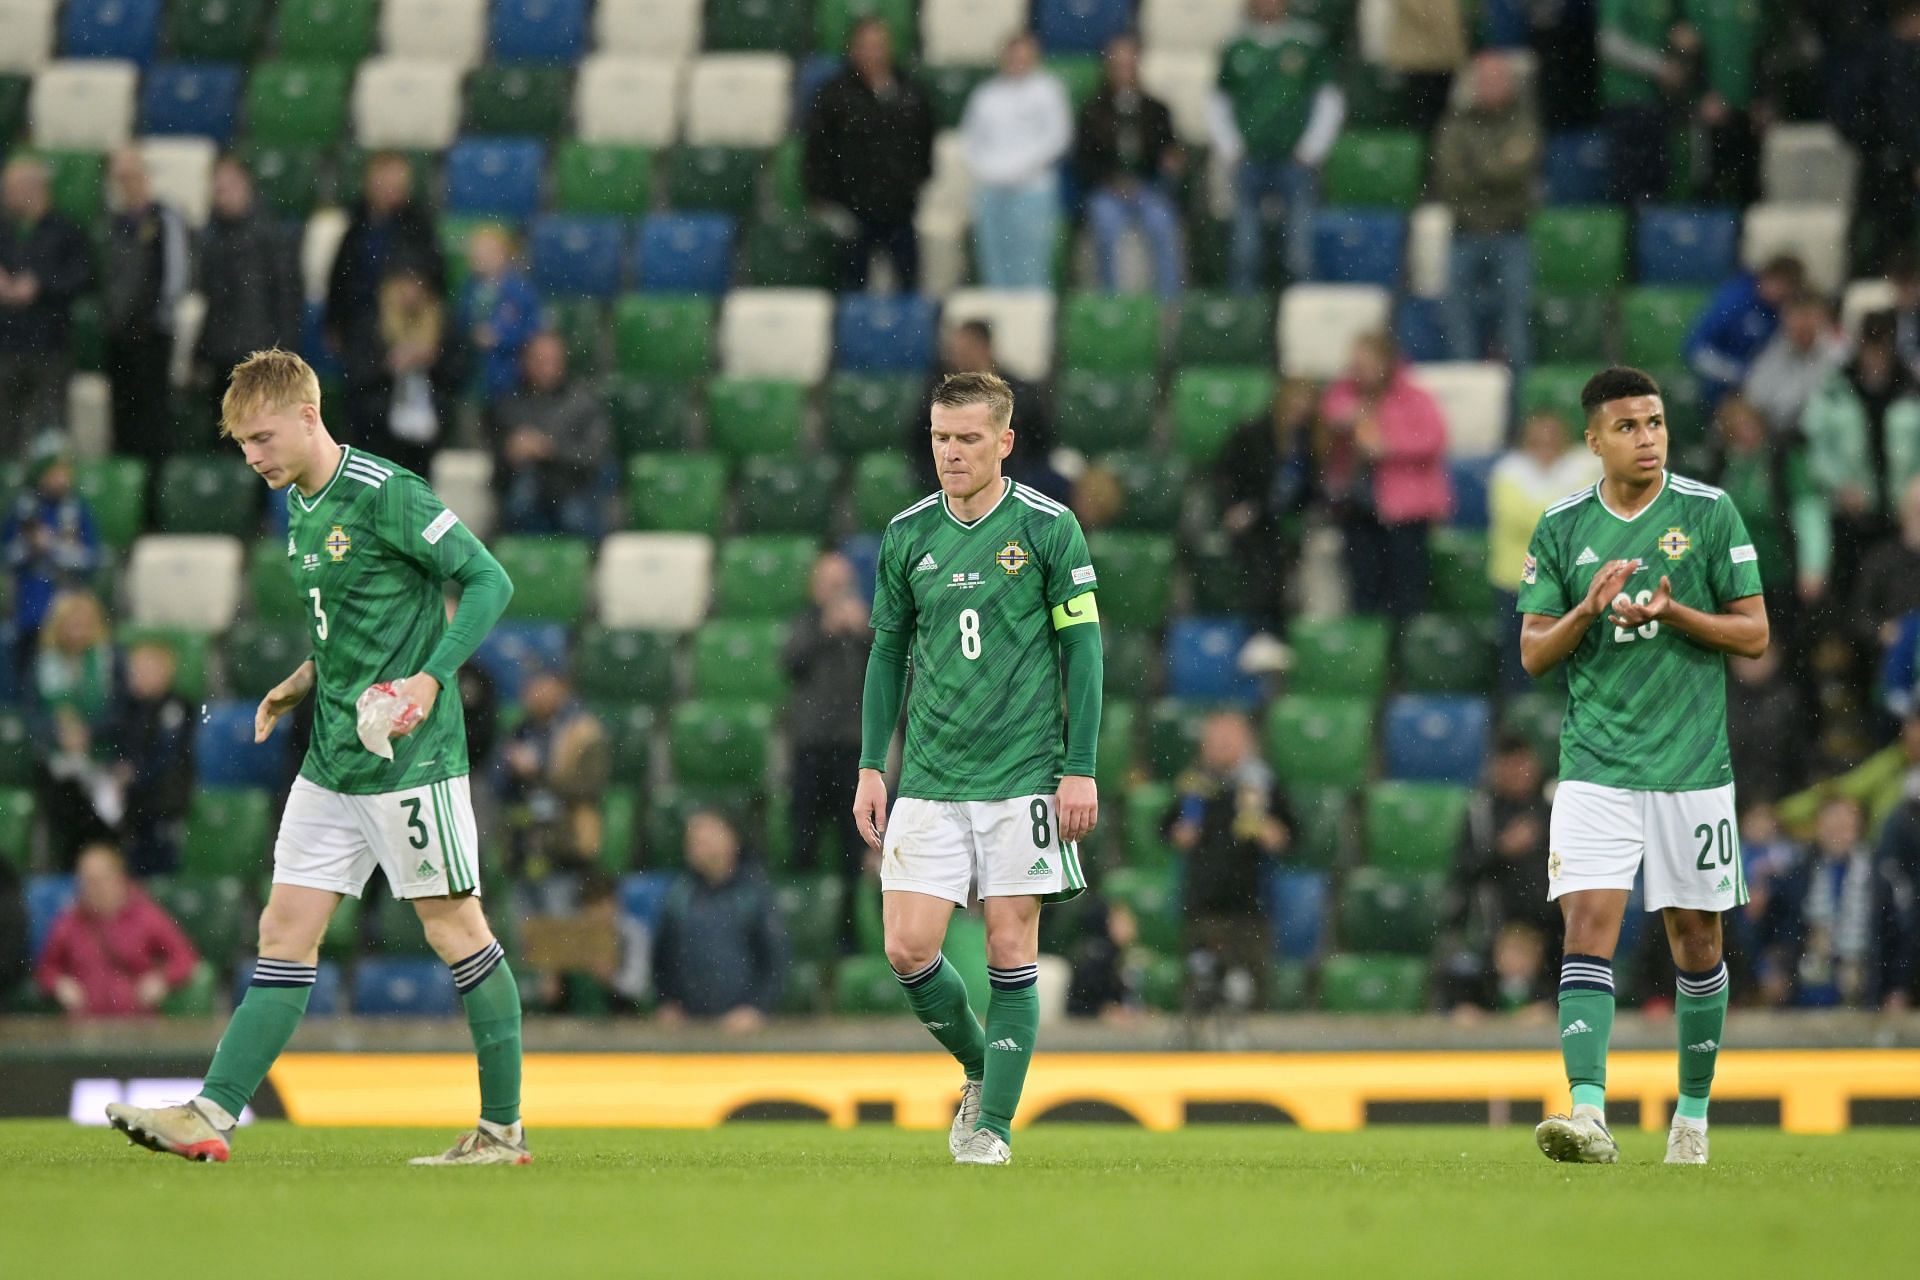 Northern Ireland take on Cyprus in their upcoming Nations League fixture on Sunday